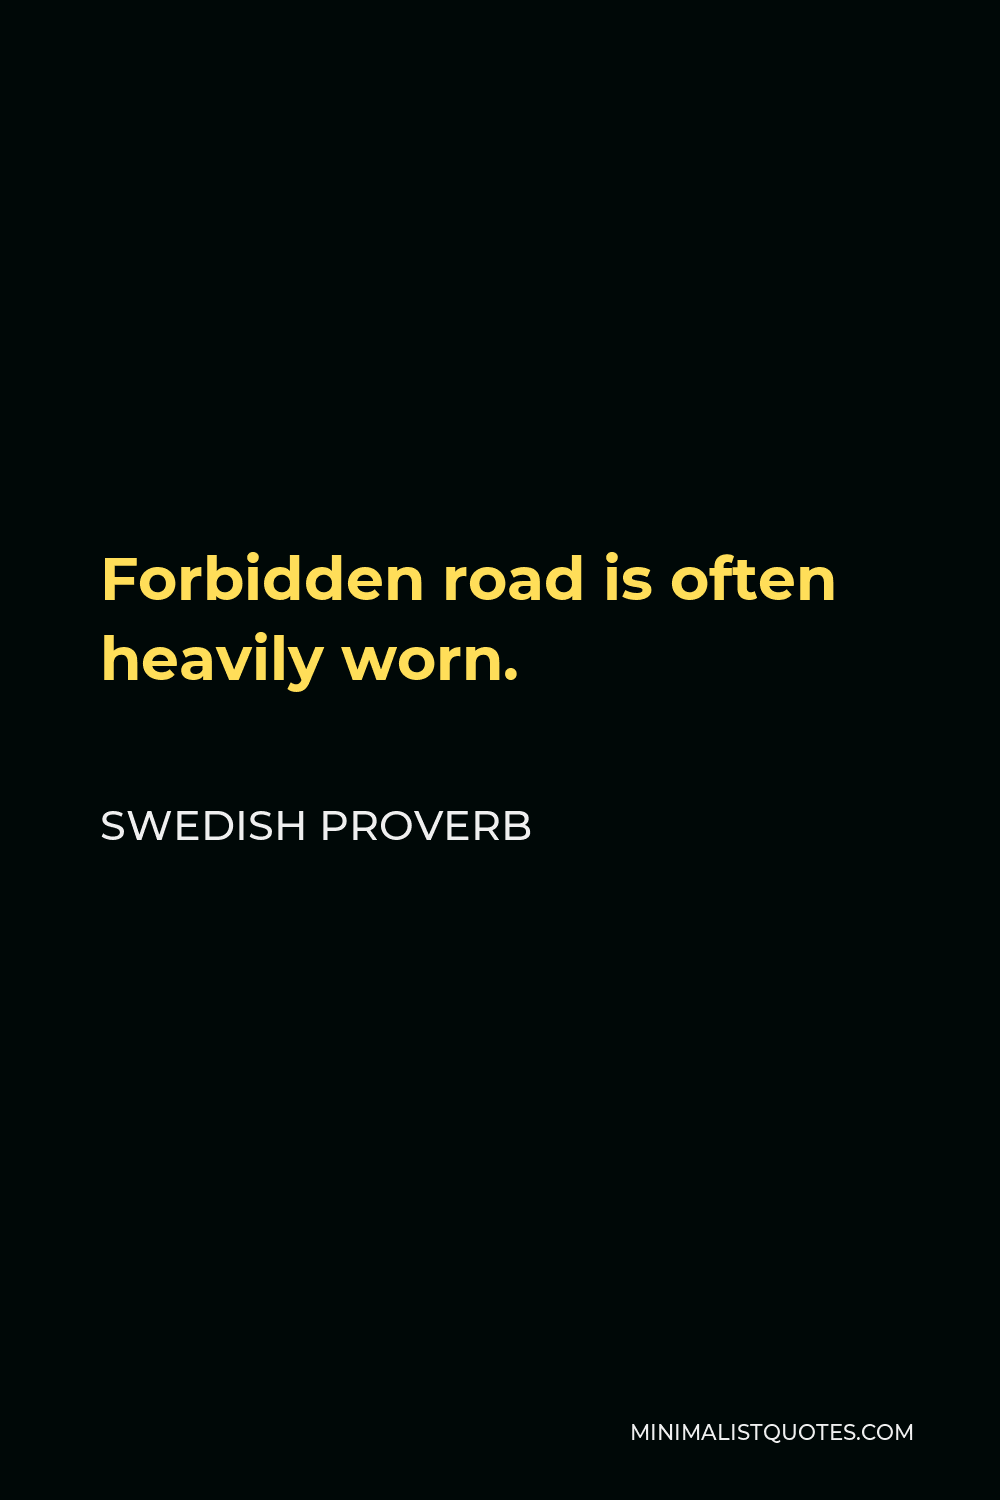 Swedish Proverb Quote - Forbidden road is often heavily worn.